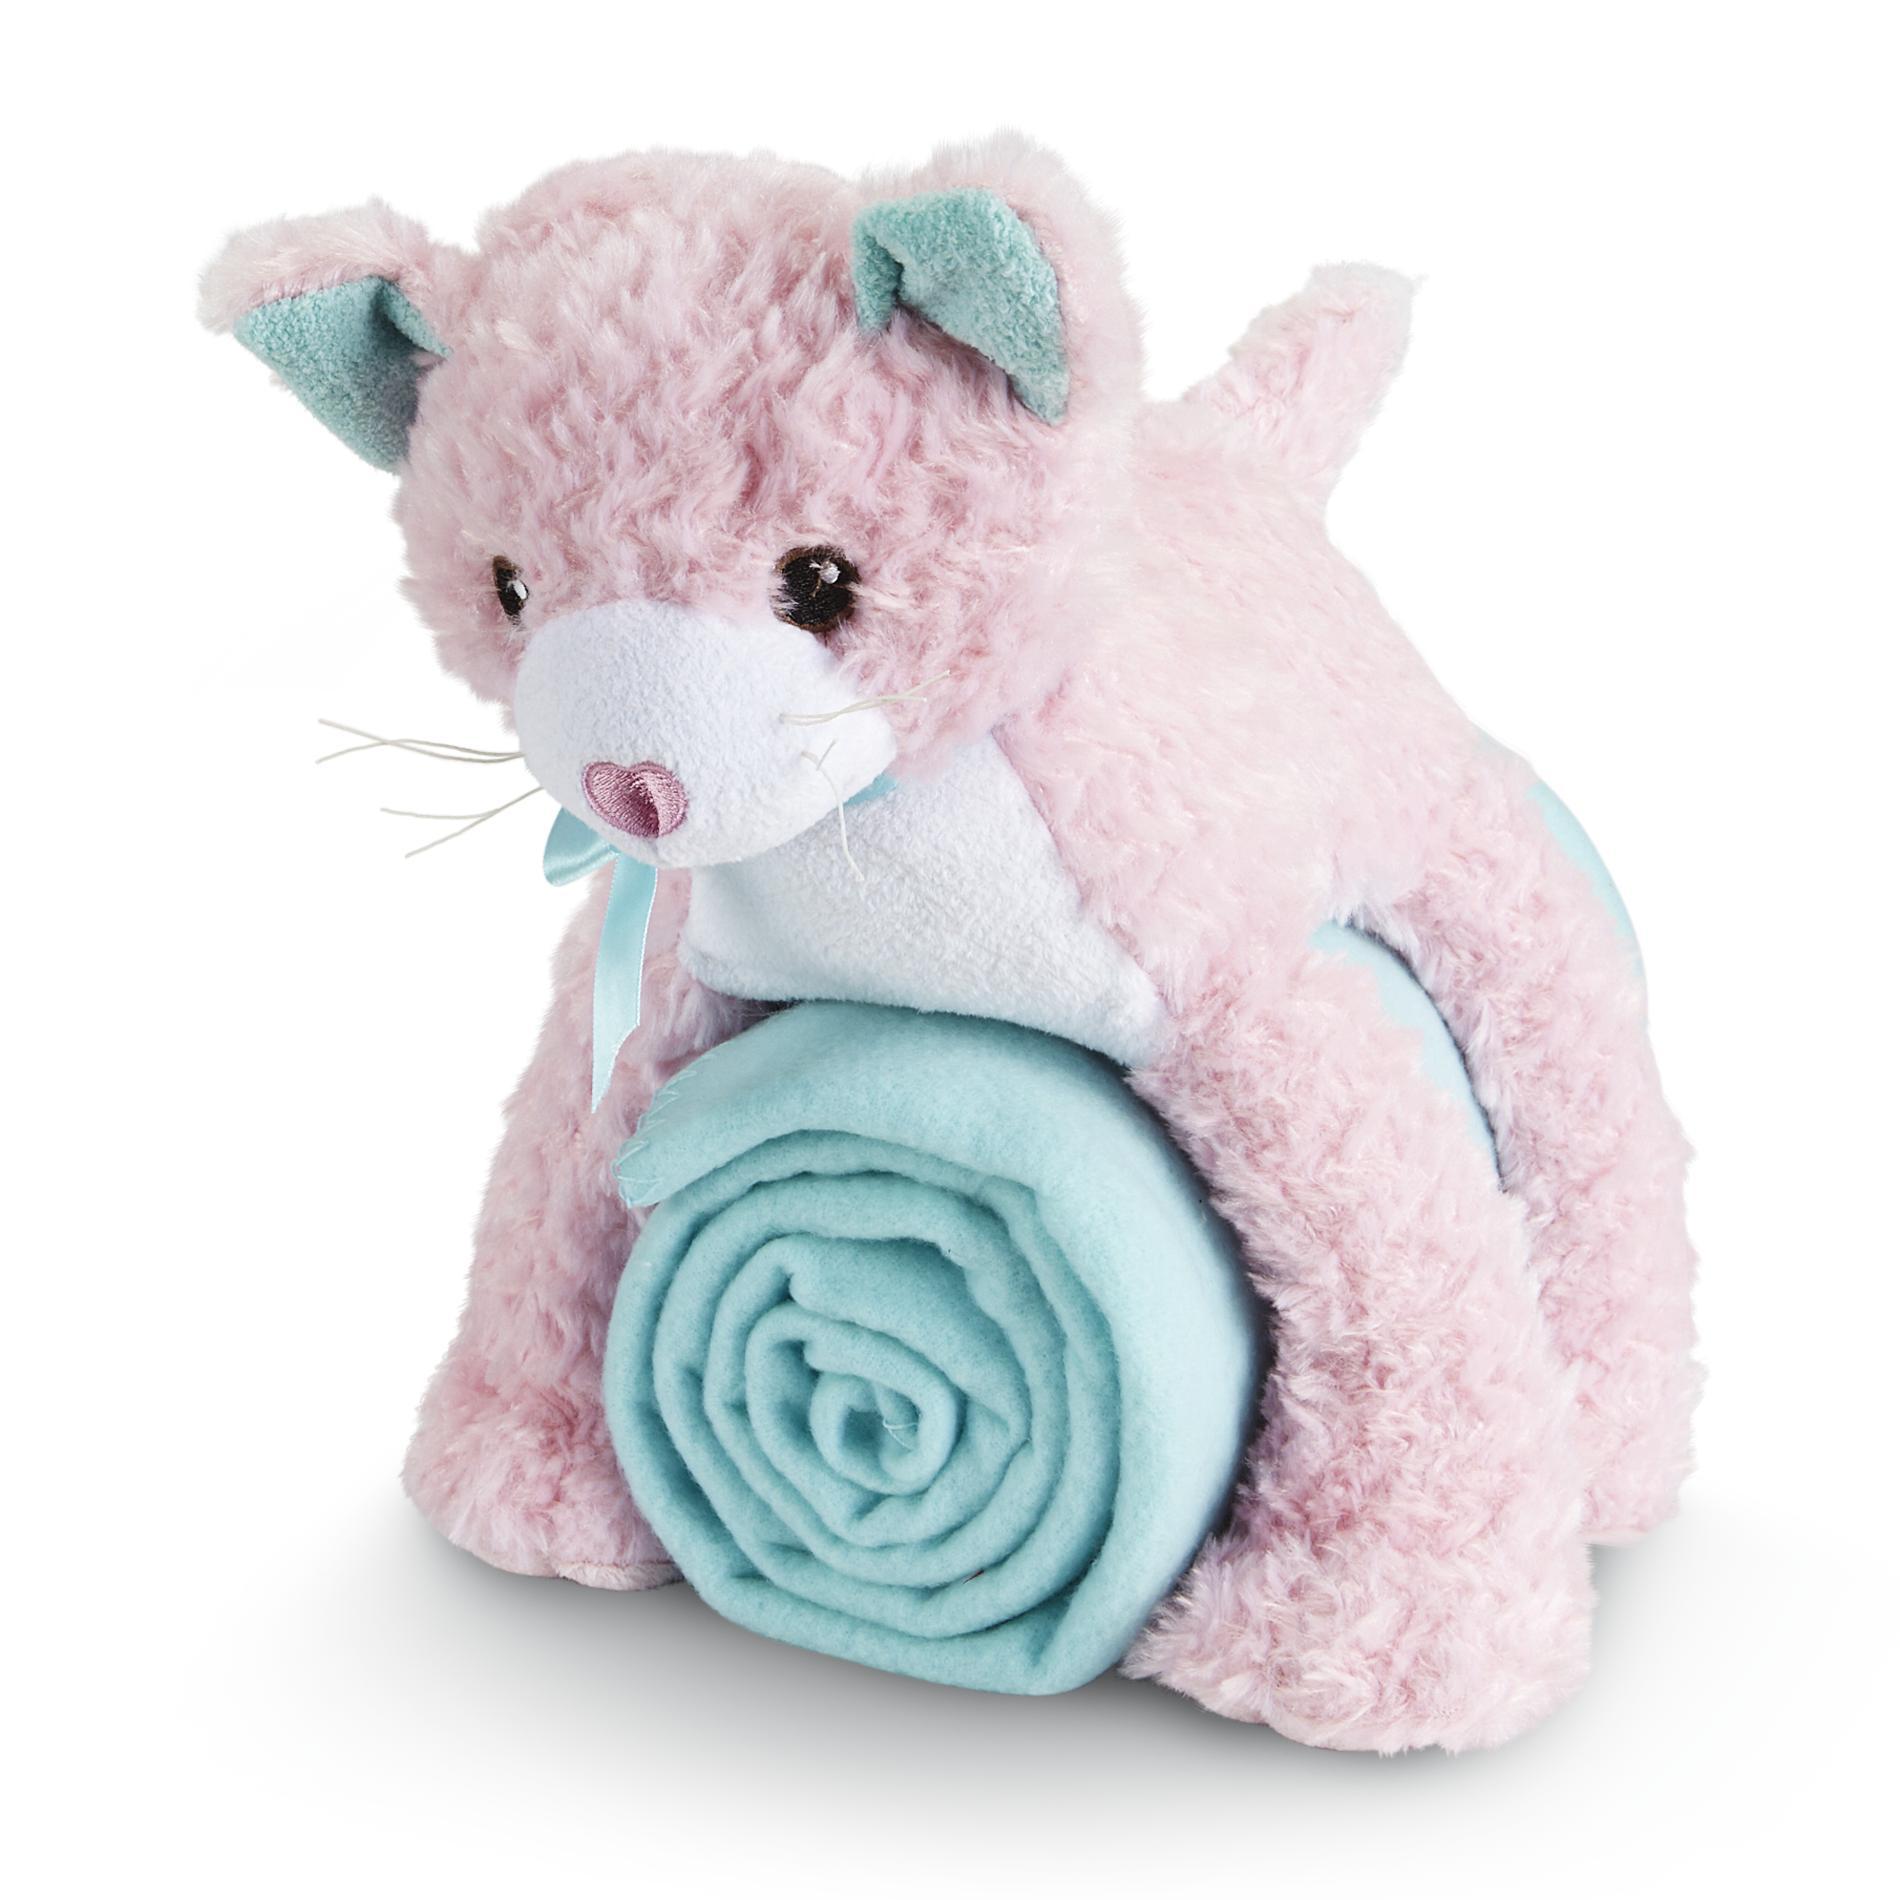 Cannon Cuddly Friend Stuffed Kitty and Throw Set